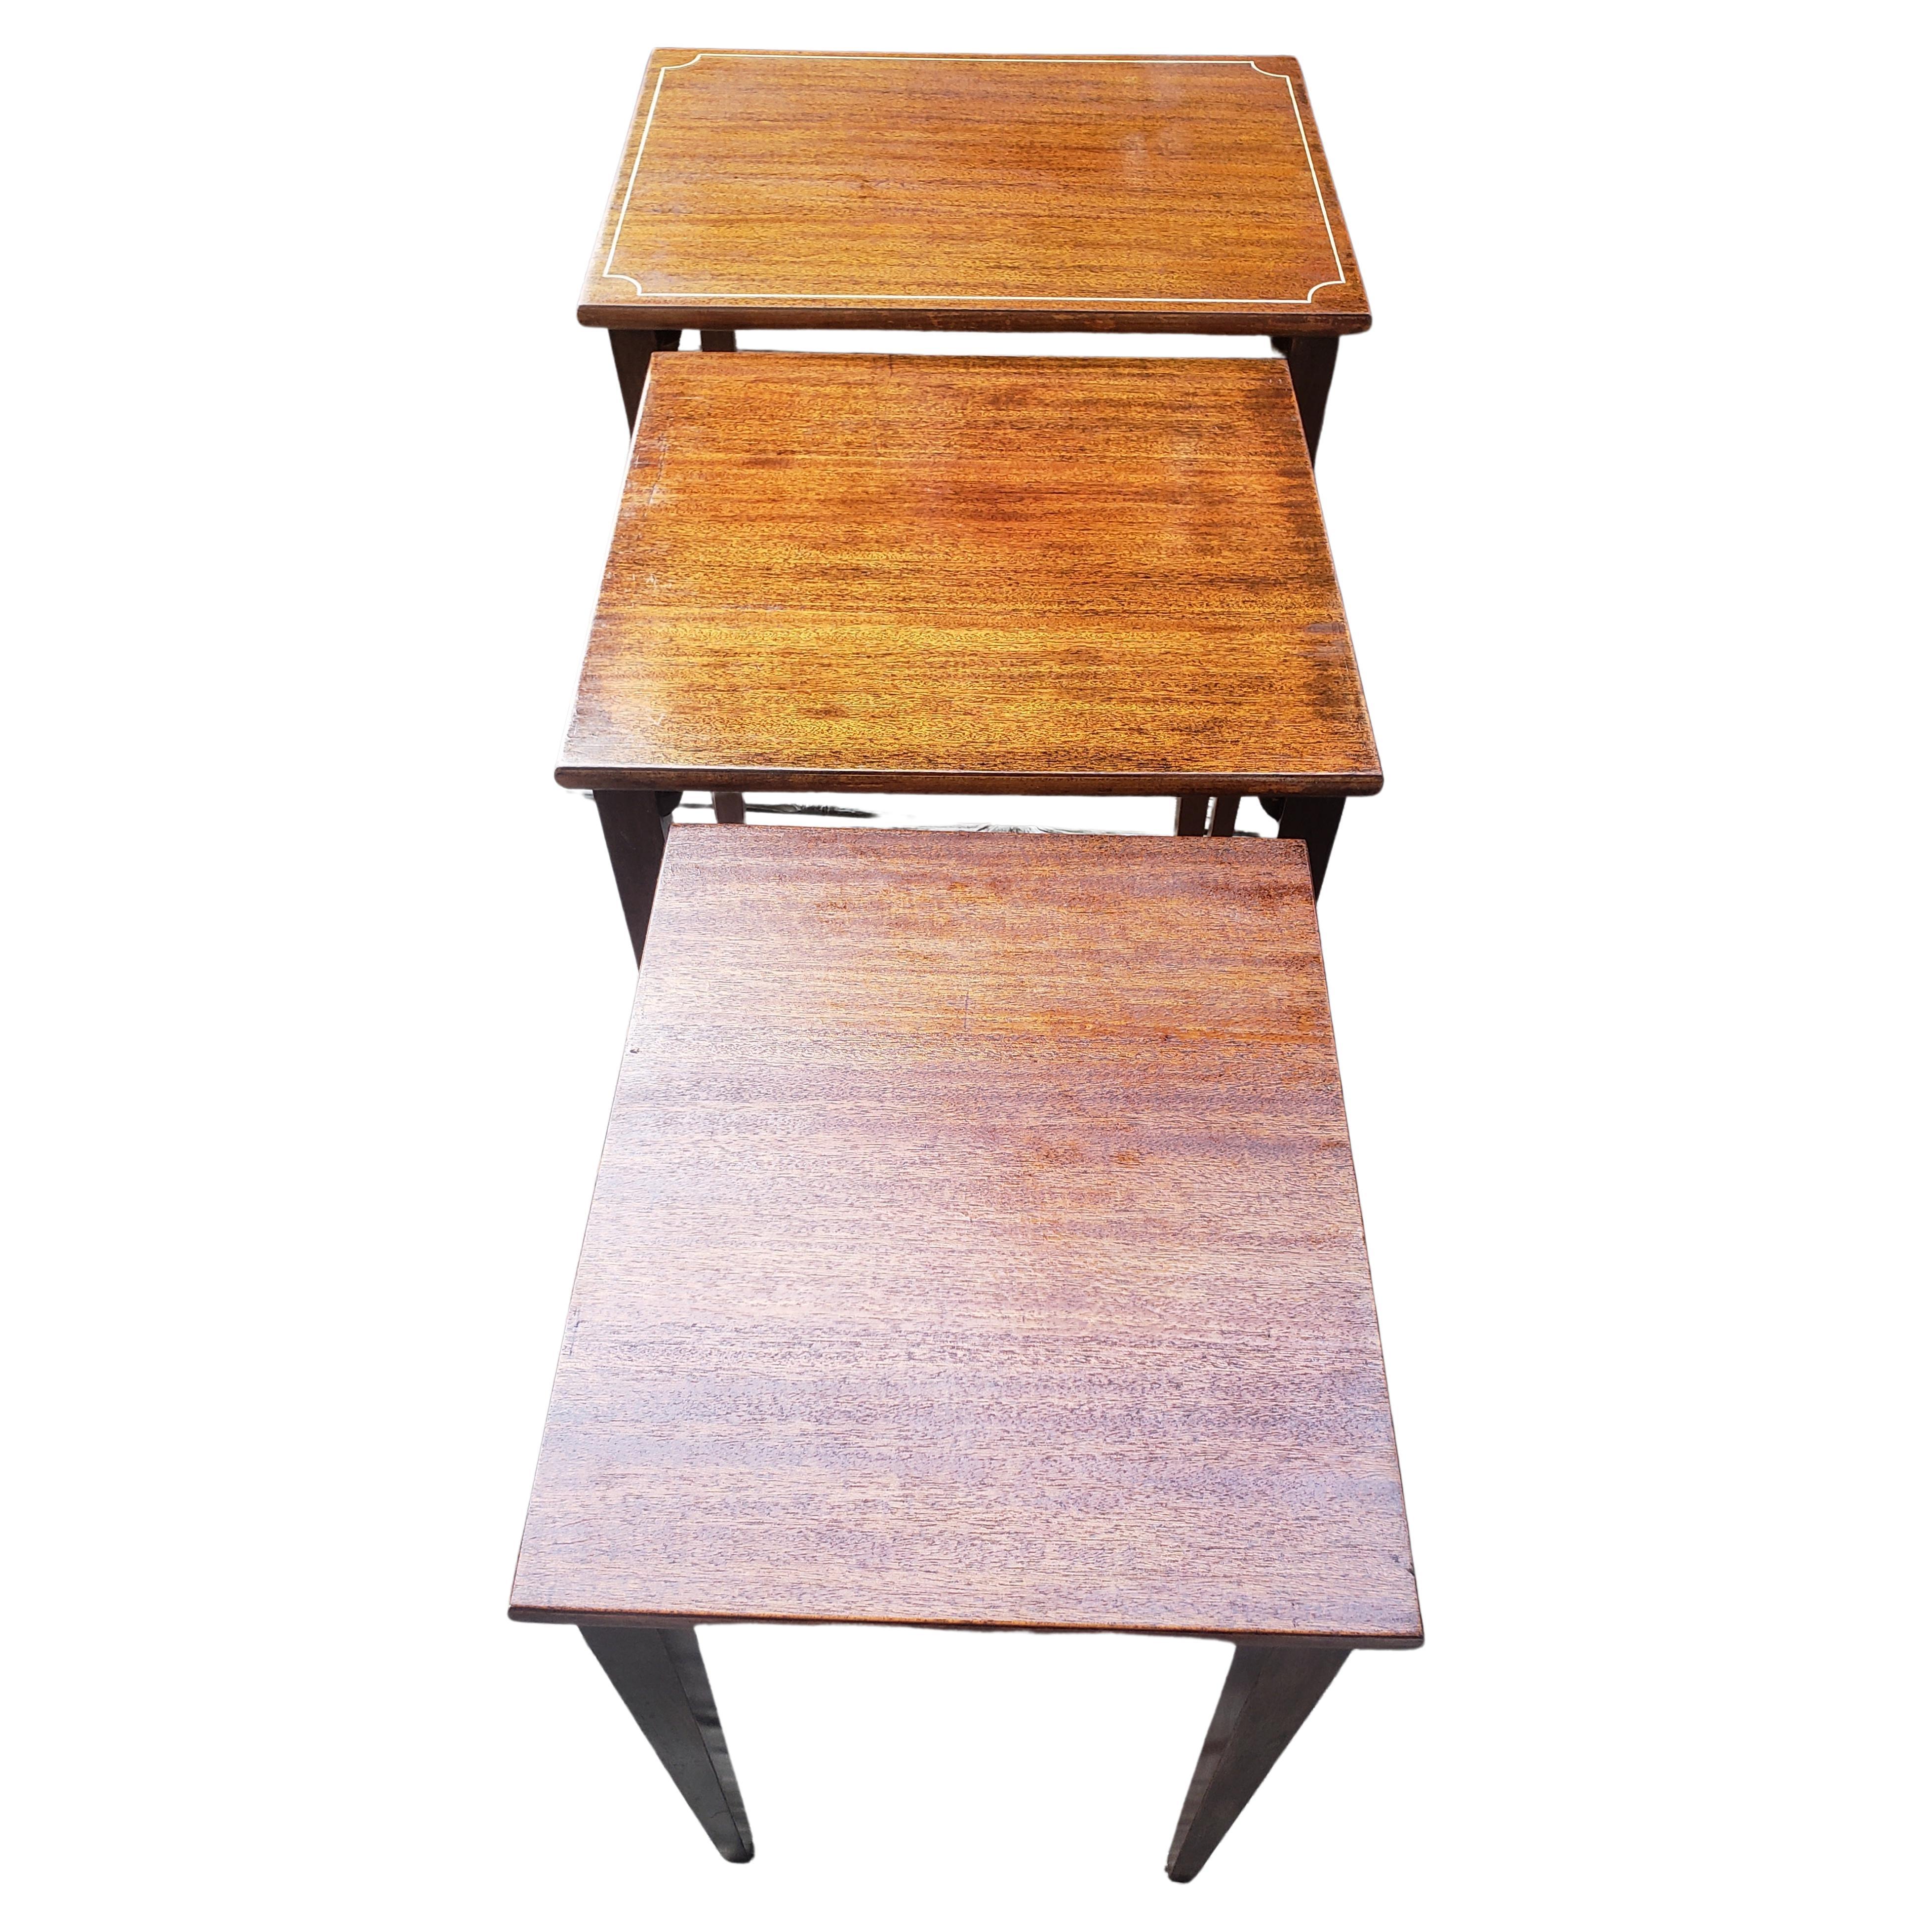 20th Century 1950s Brandt Fine Furniture Refinished Genuine Mahogany Nesting Tables For Sale